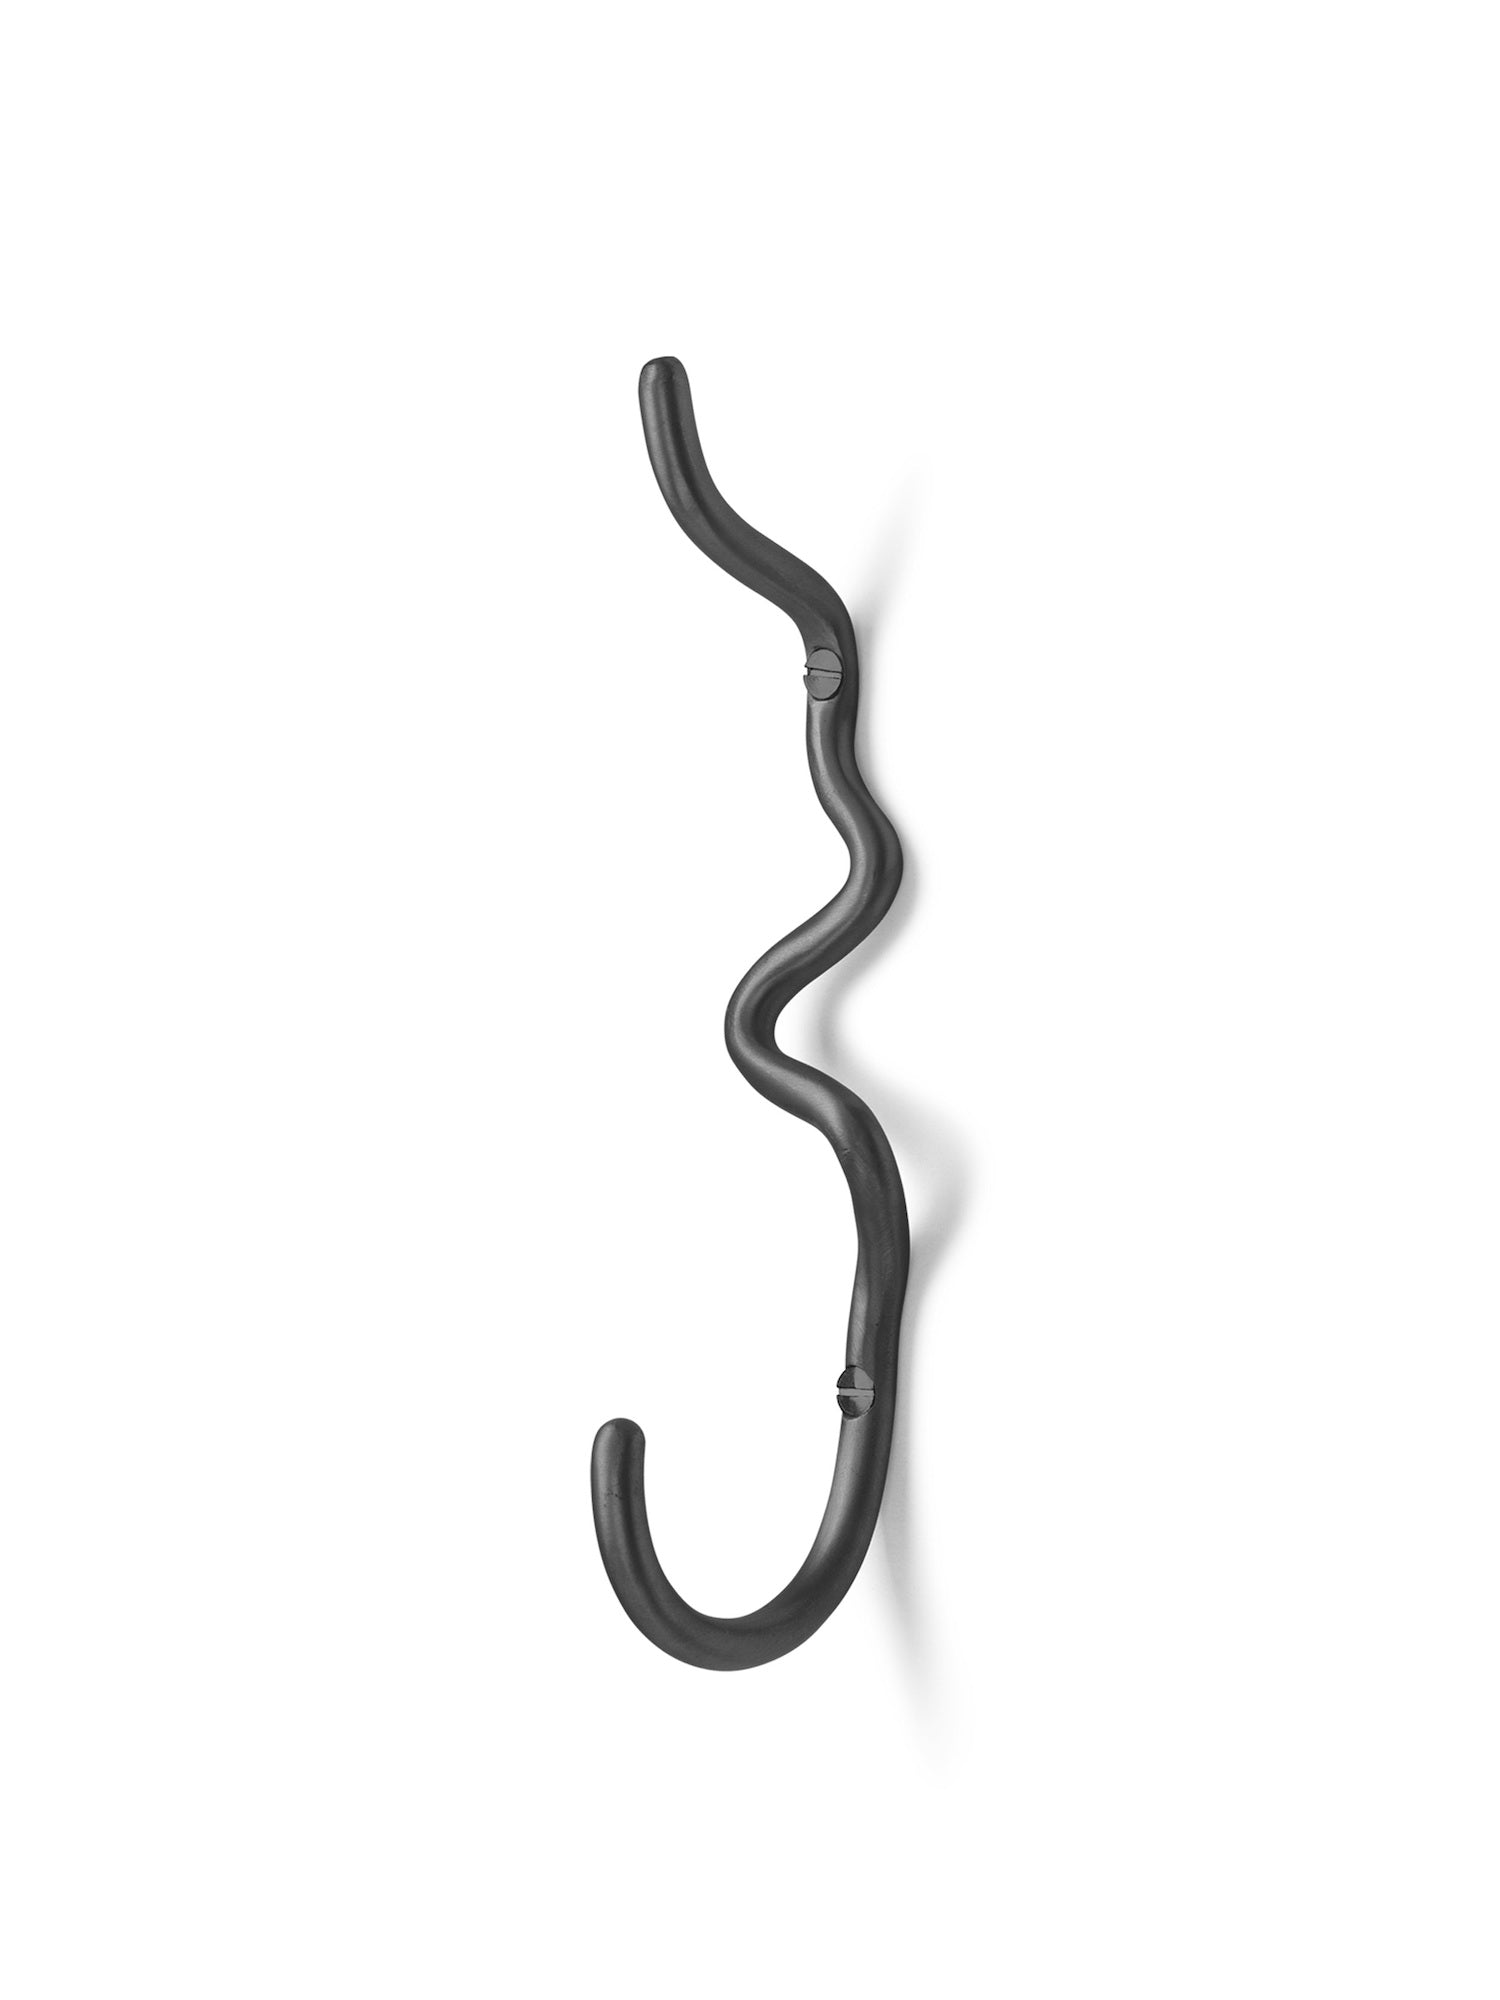 Black Curvature Hook. An organically shaped hook hand formed in black painted brass with a matte finish. 